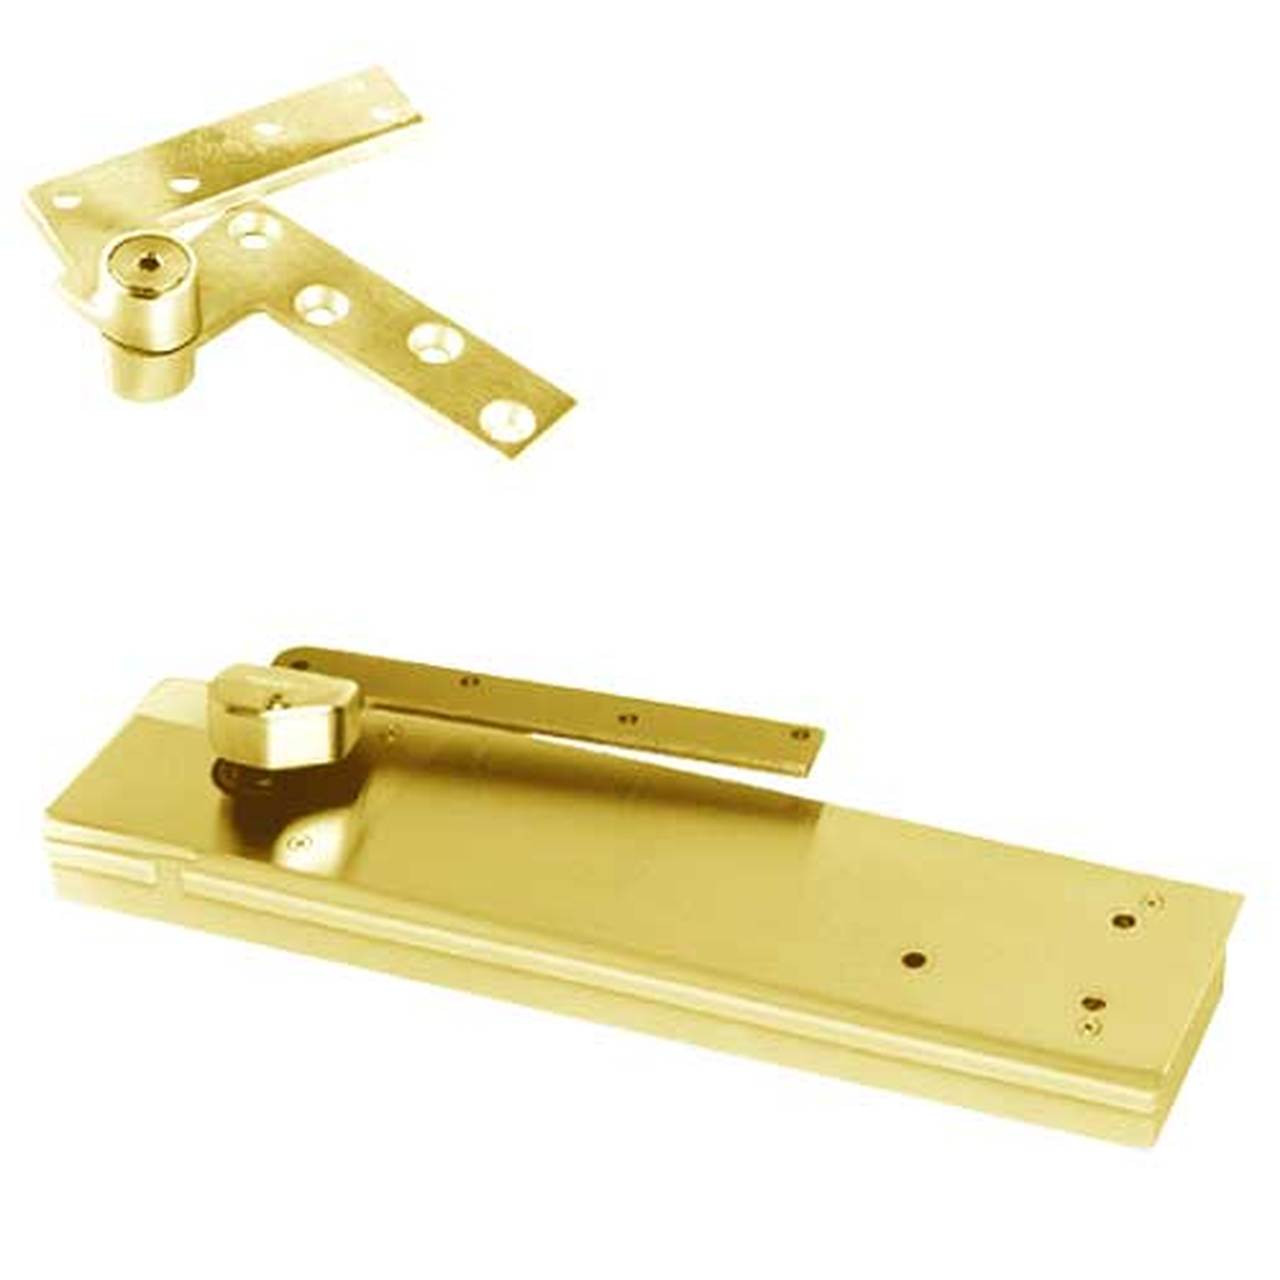 FHM5105NBC-LFP-LCC-RH-605 Rixson HM51 Series 3/4" Offset Hung Shallow Depth Floor Closers in Bright Brass Finish